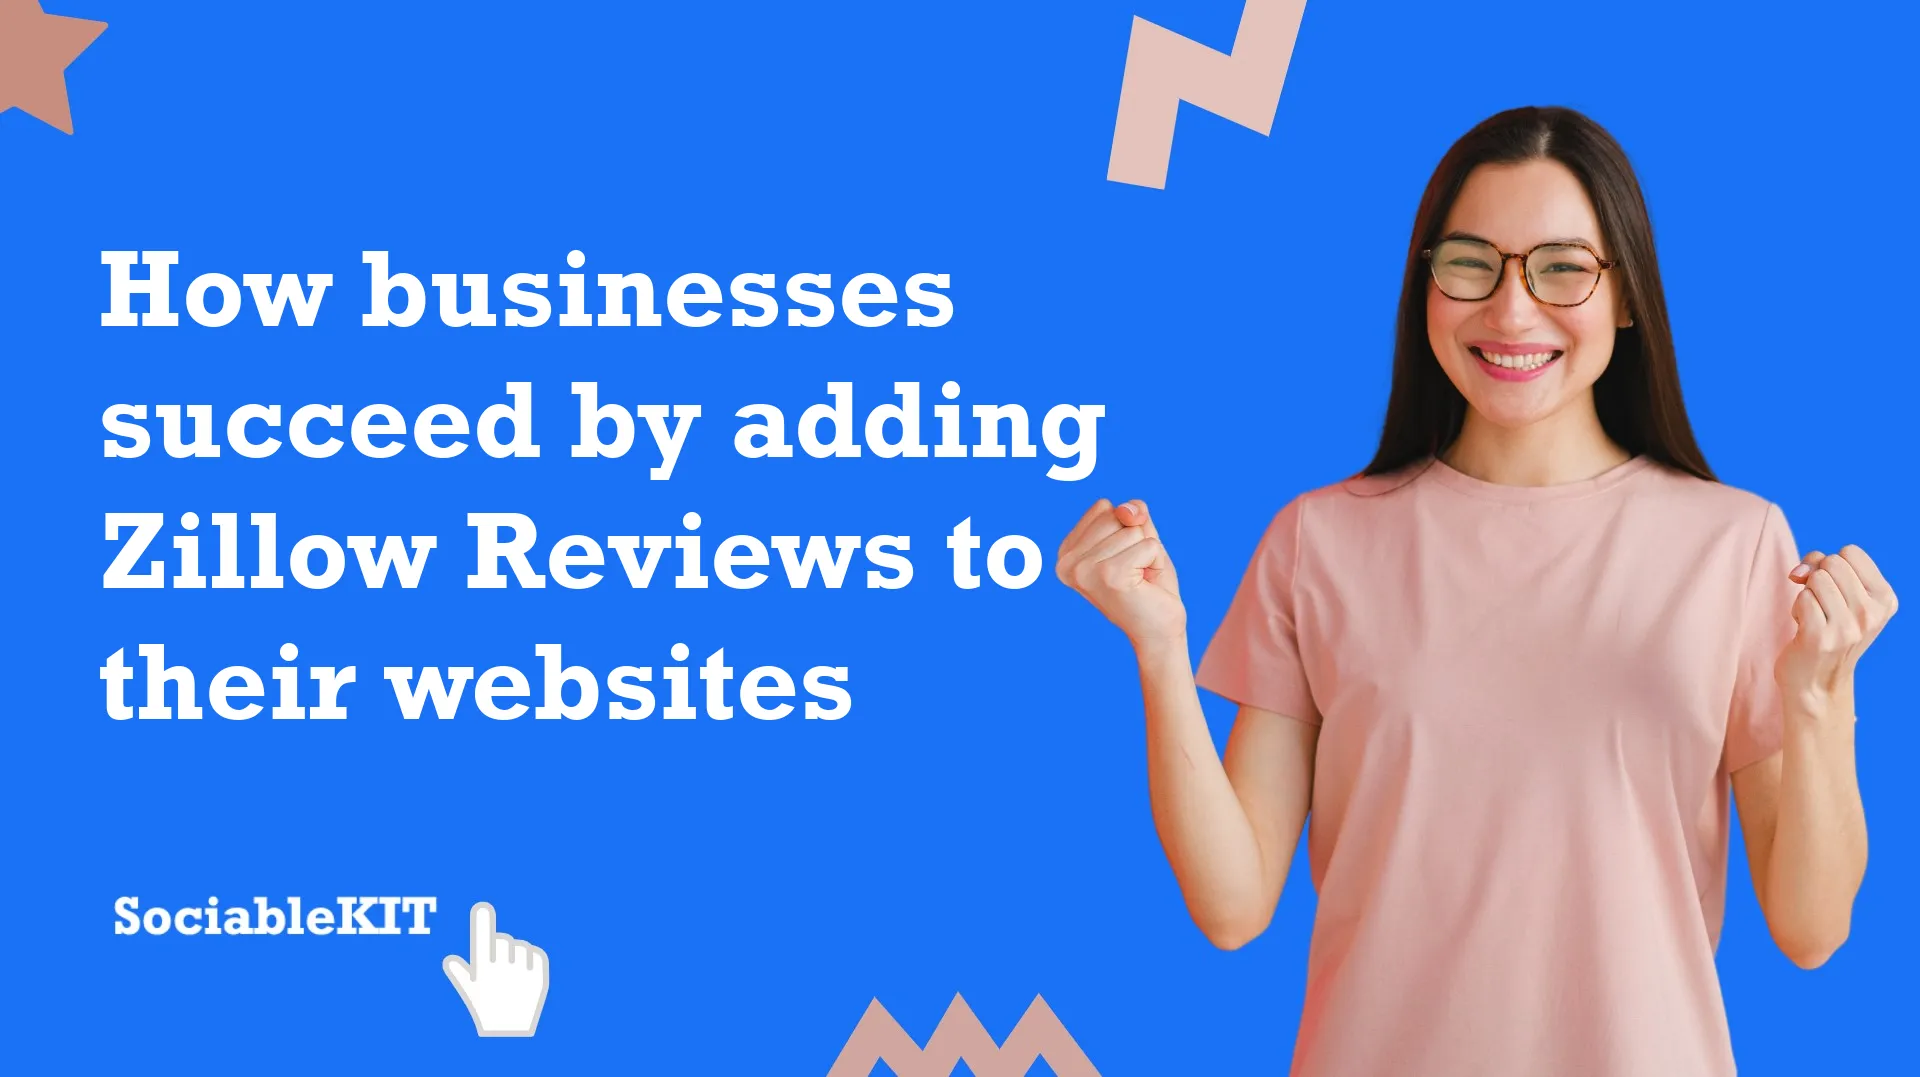 How businesses succeed by adding Zillow Reviews to their websites